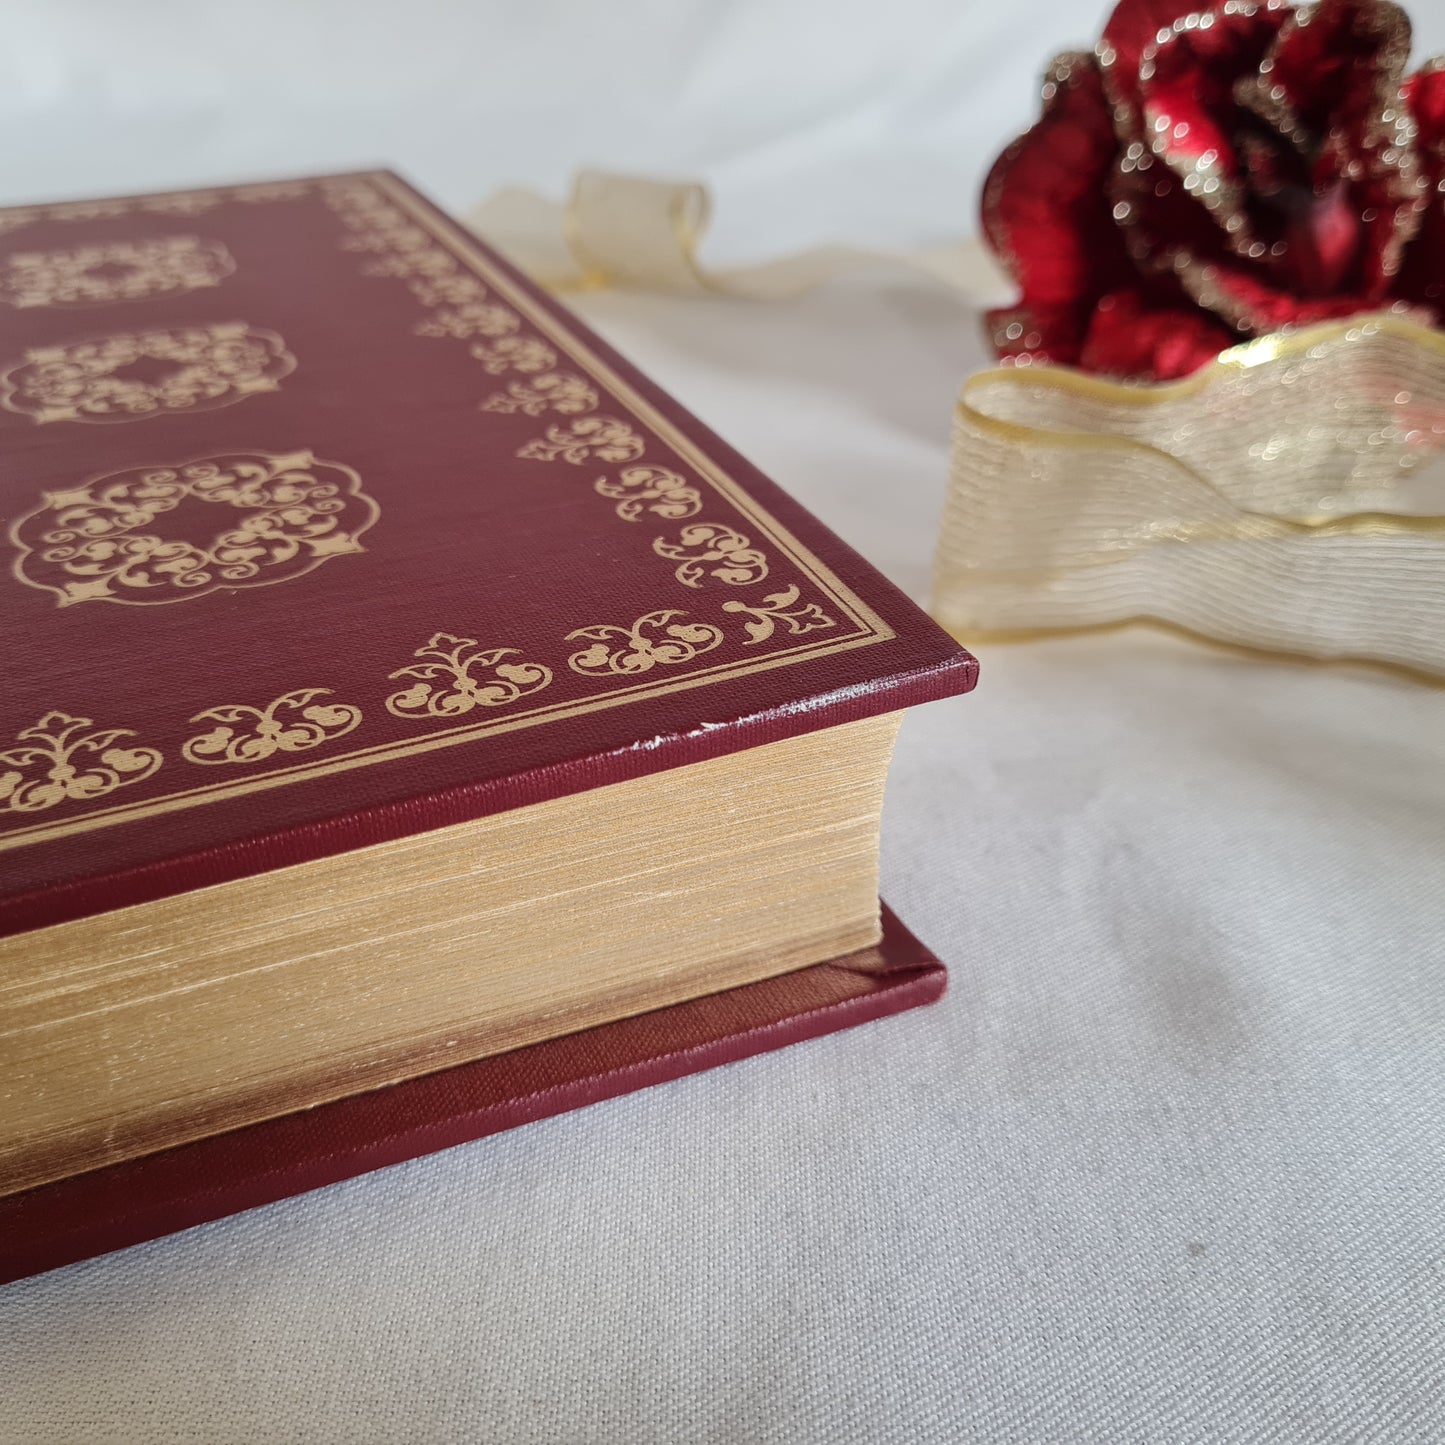 Jane Eyre by Charlotte Bronte / Extremely Rare Limited Edition / Quarter Dark Red Leather Bound / 22ct Gold Accent Decoration / Illustrated